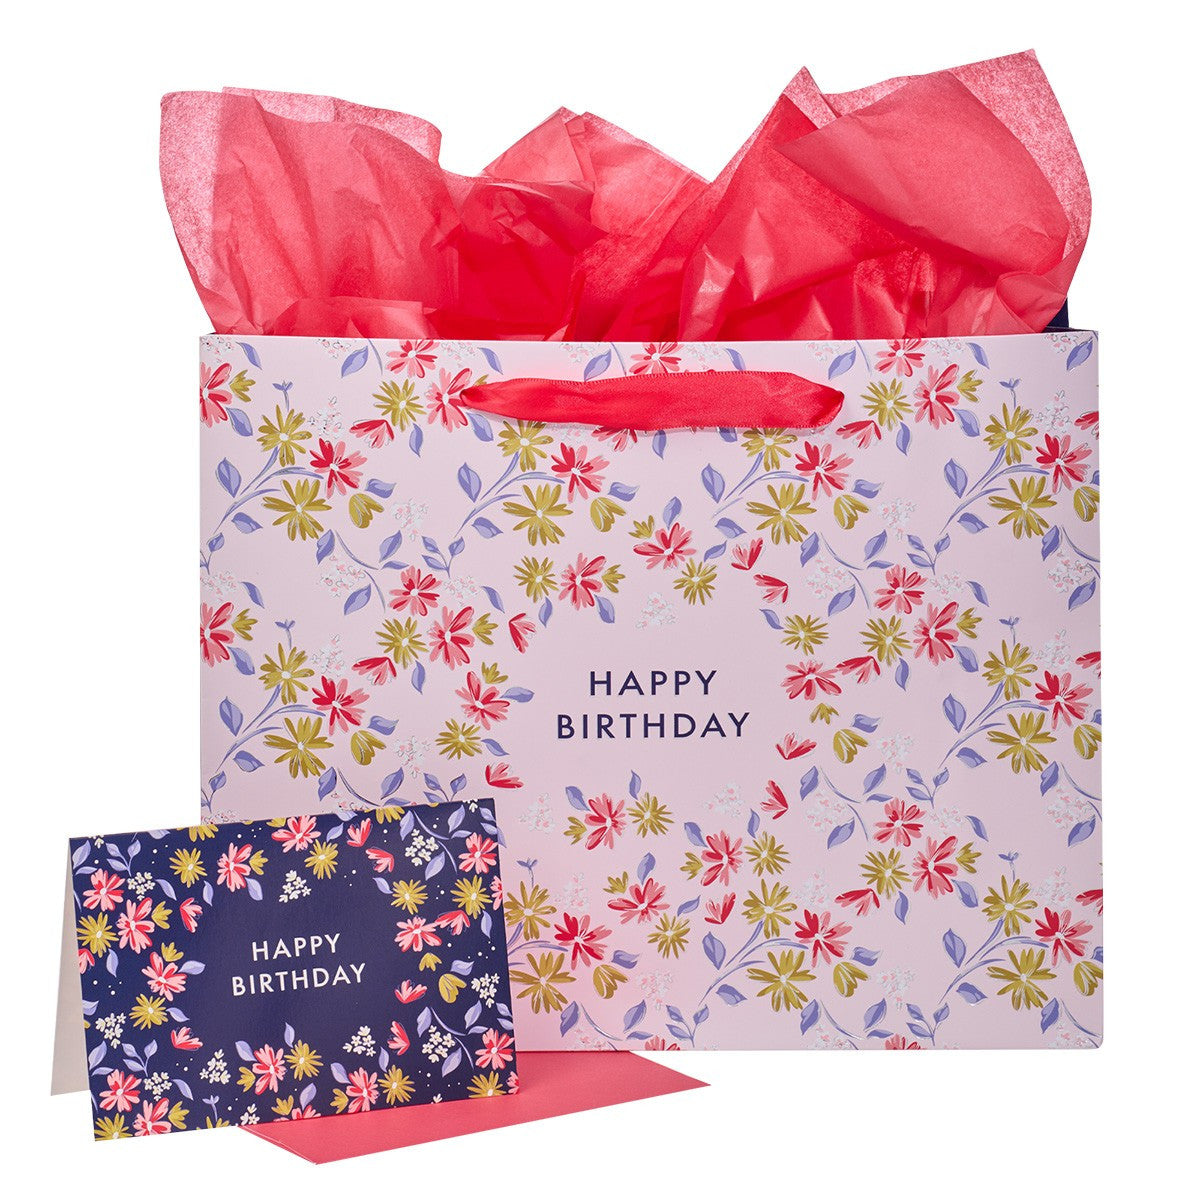 Happy Birthday Pink Flower Trellis Large Landscape Gift Bag Set with Card - The Christian Gift Company